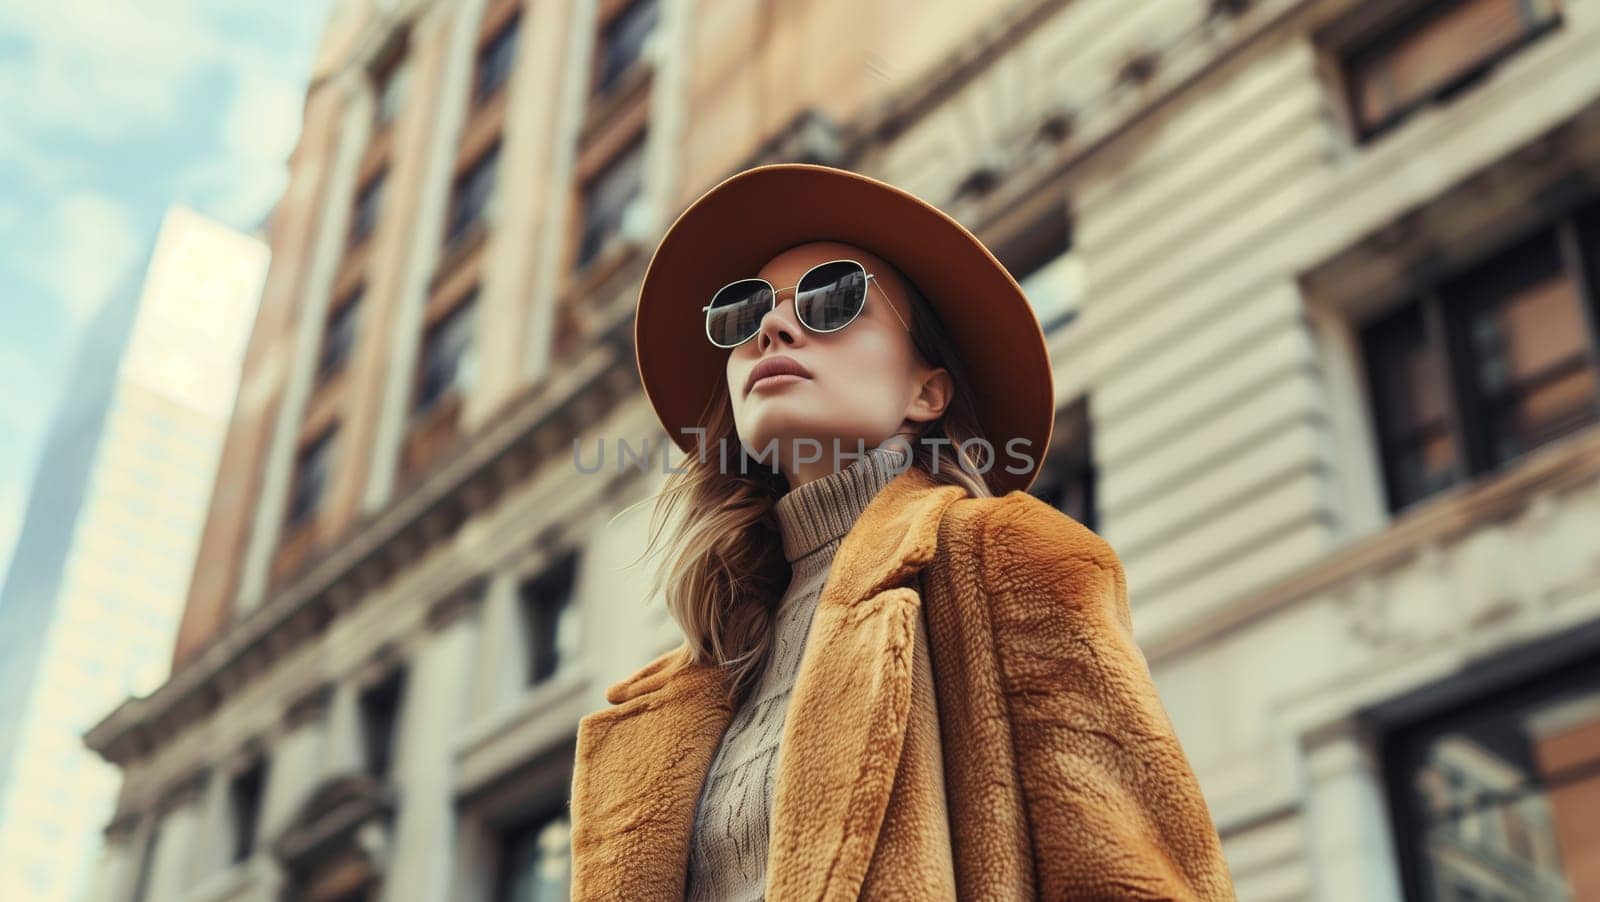 Fashionable portrait of beautiful stylish young woman posing in the city wearing hat, glasses, coat